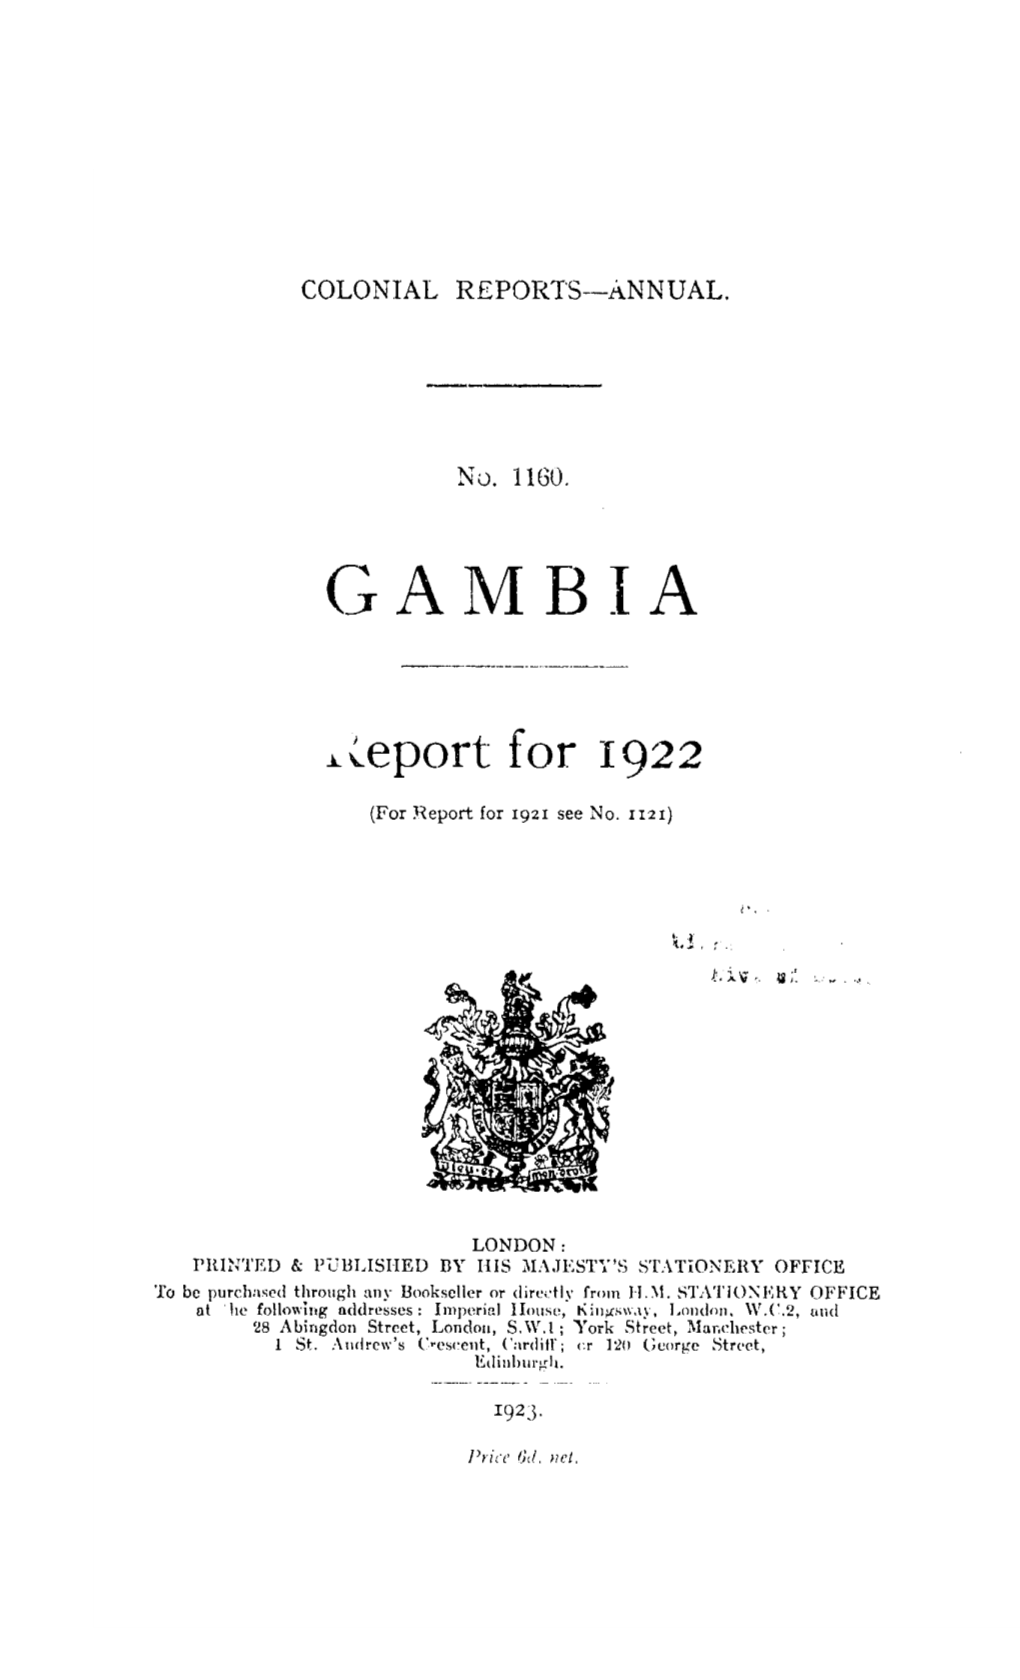 Annual Report of the Colonies. Gambia 1922